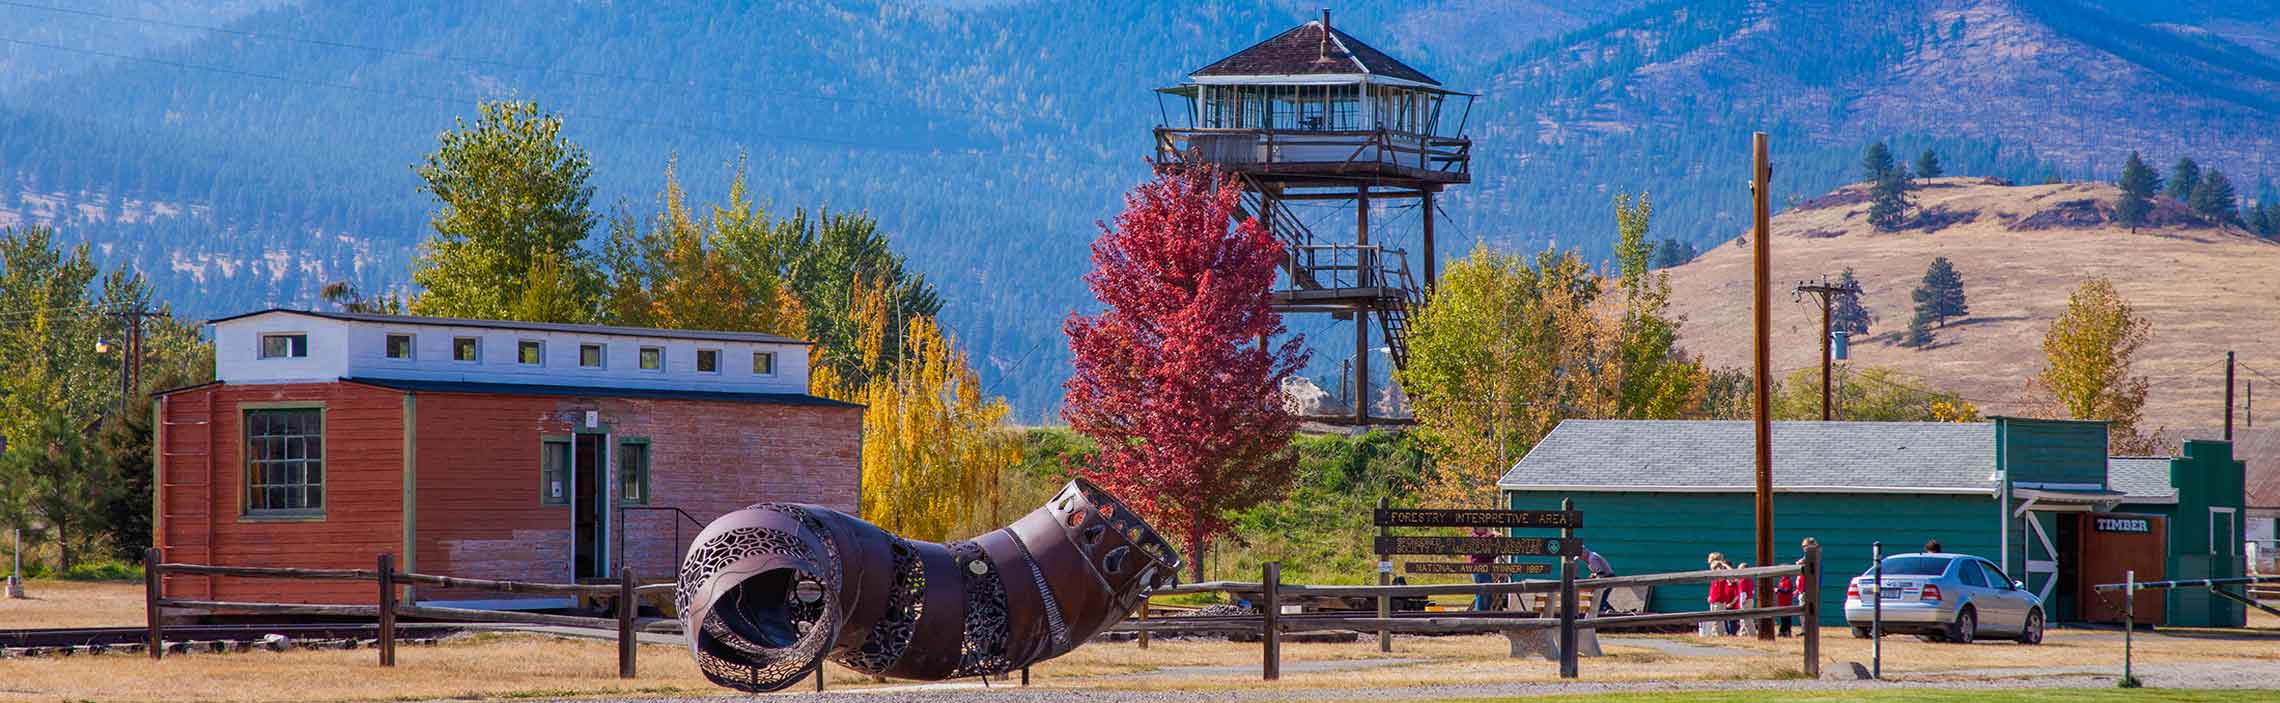 Check Out The Historical Museum At Fort Missoula